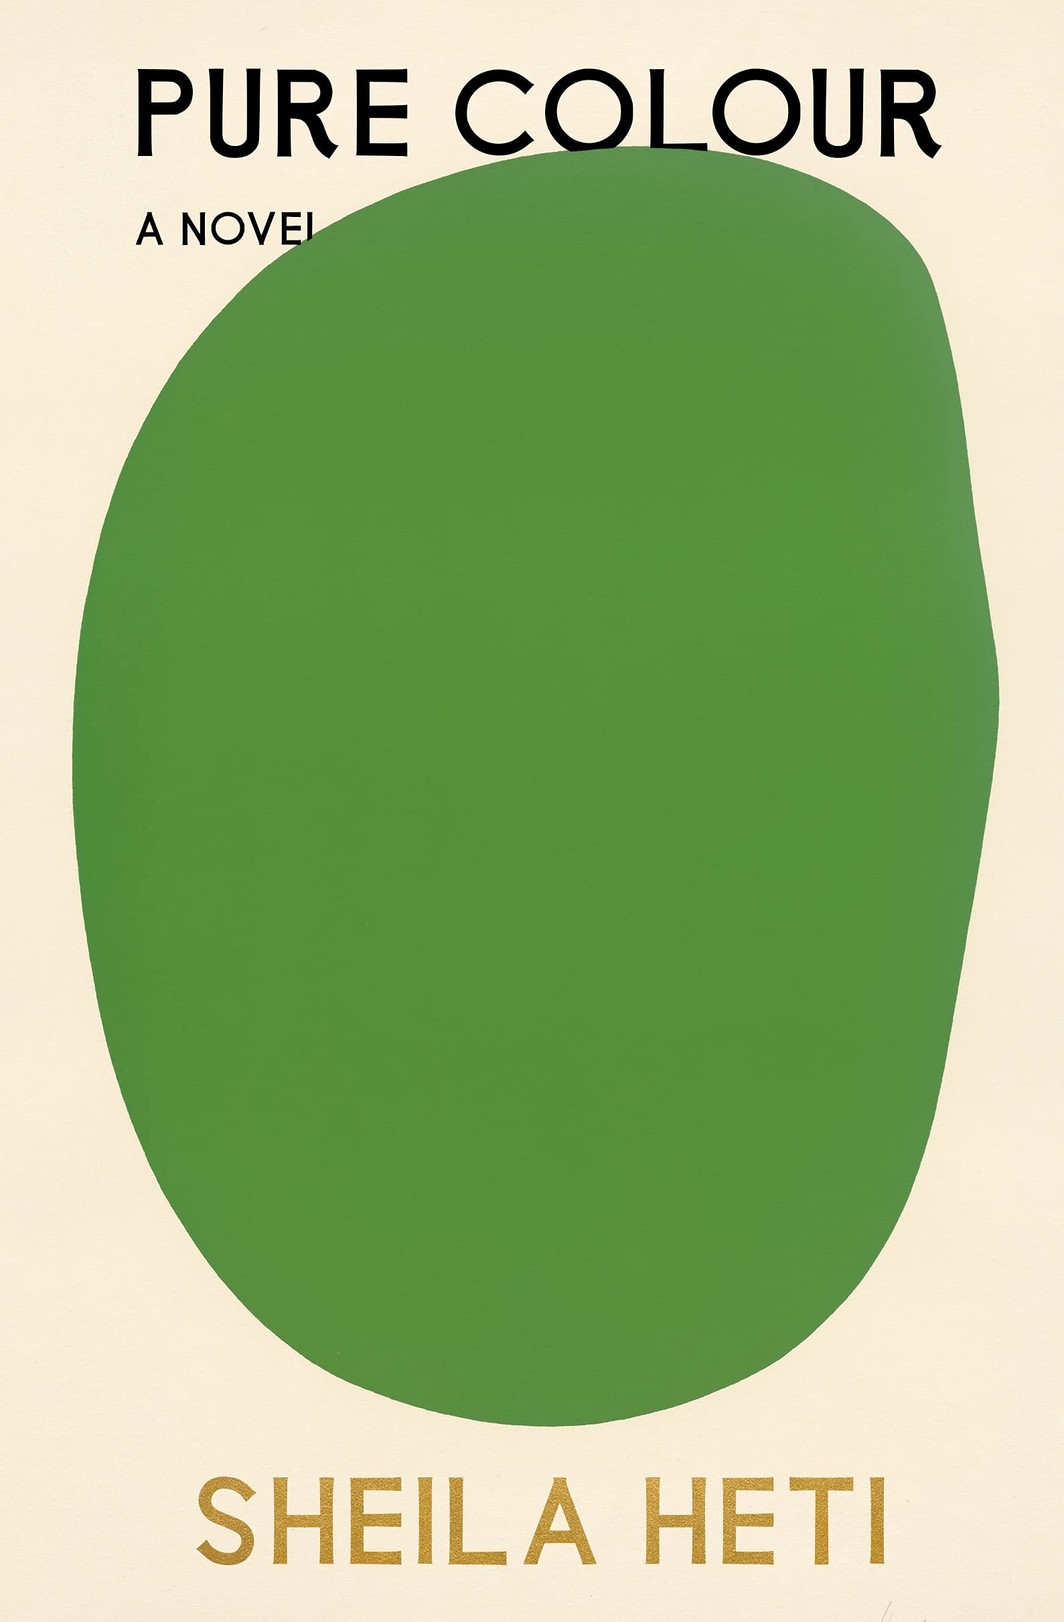 The cover of Pure Colour